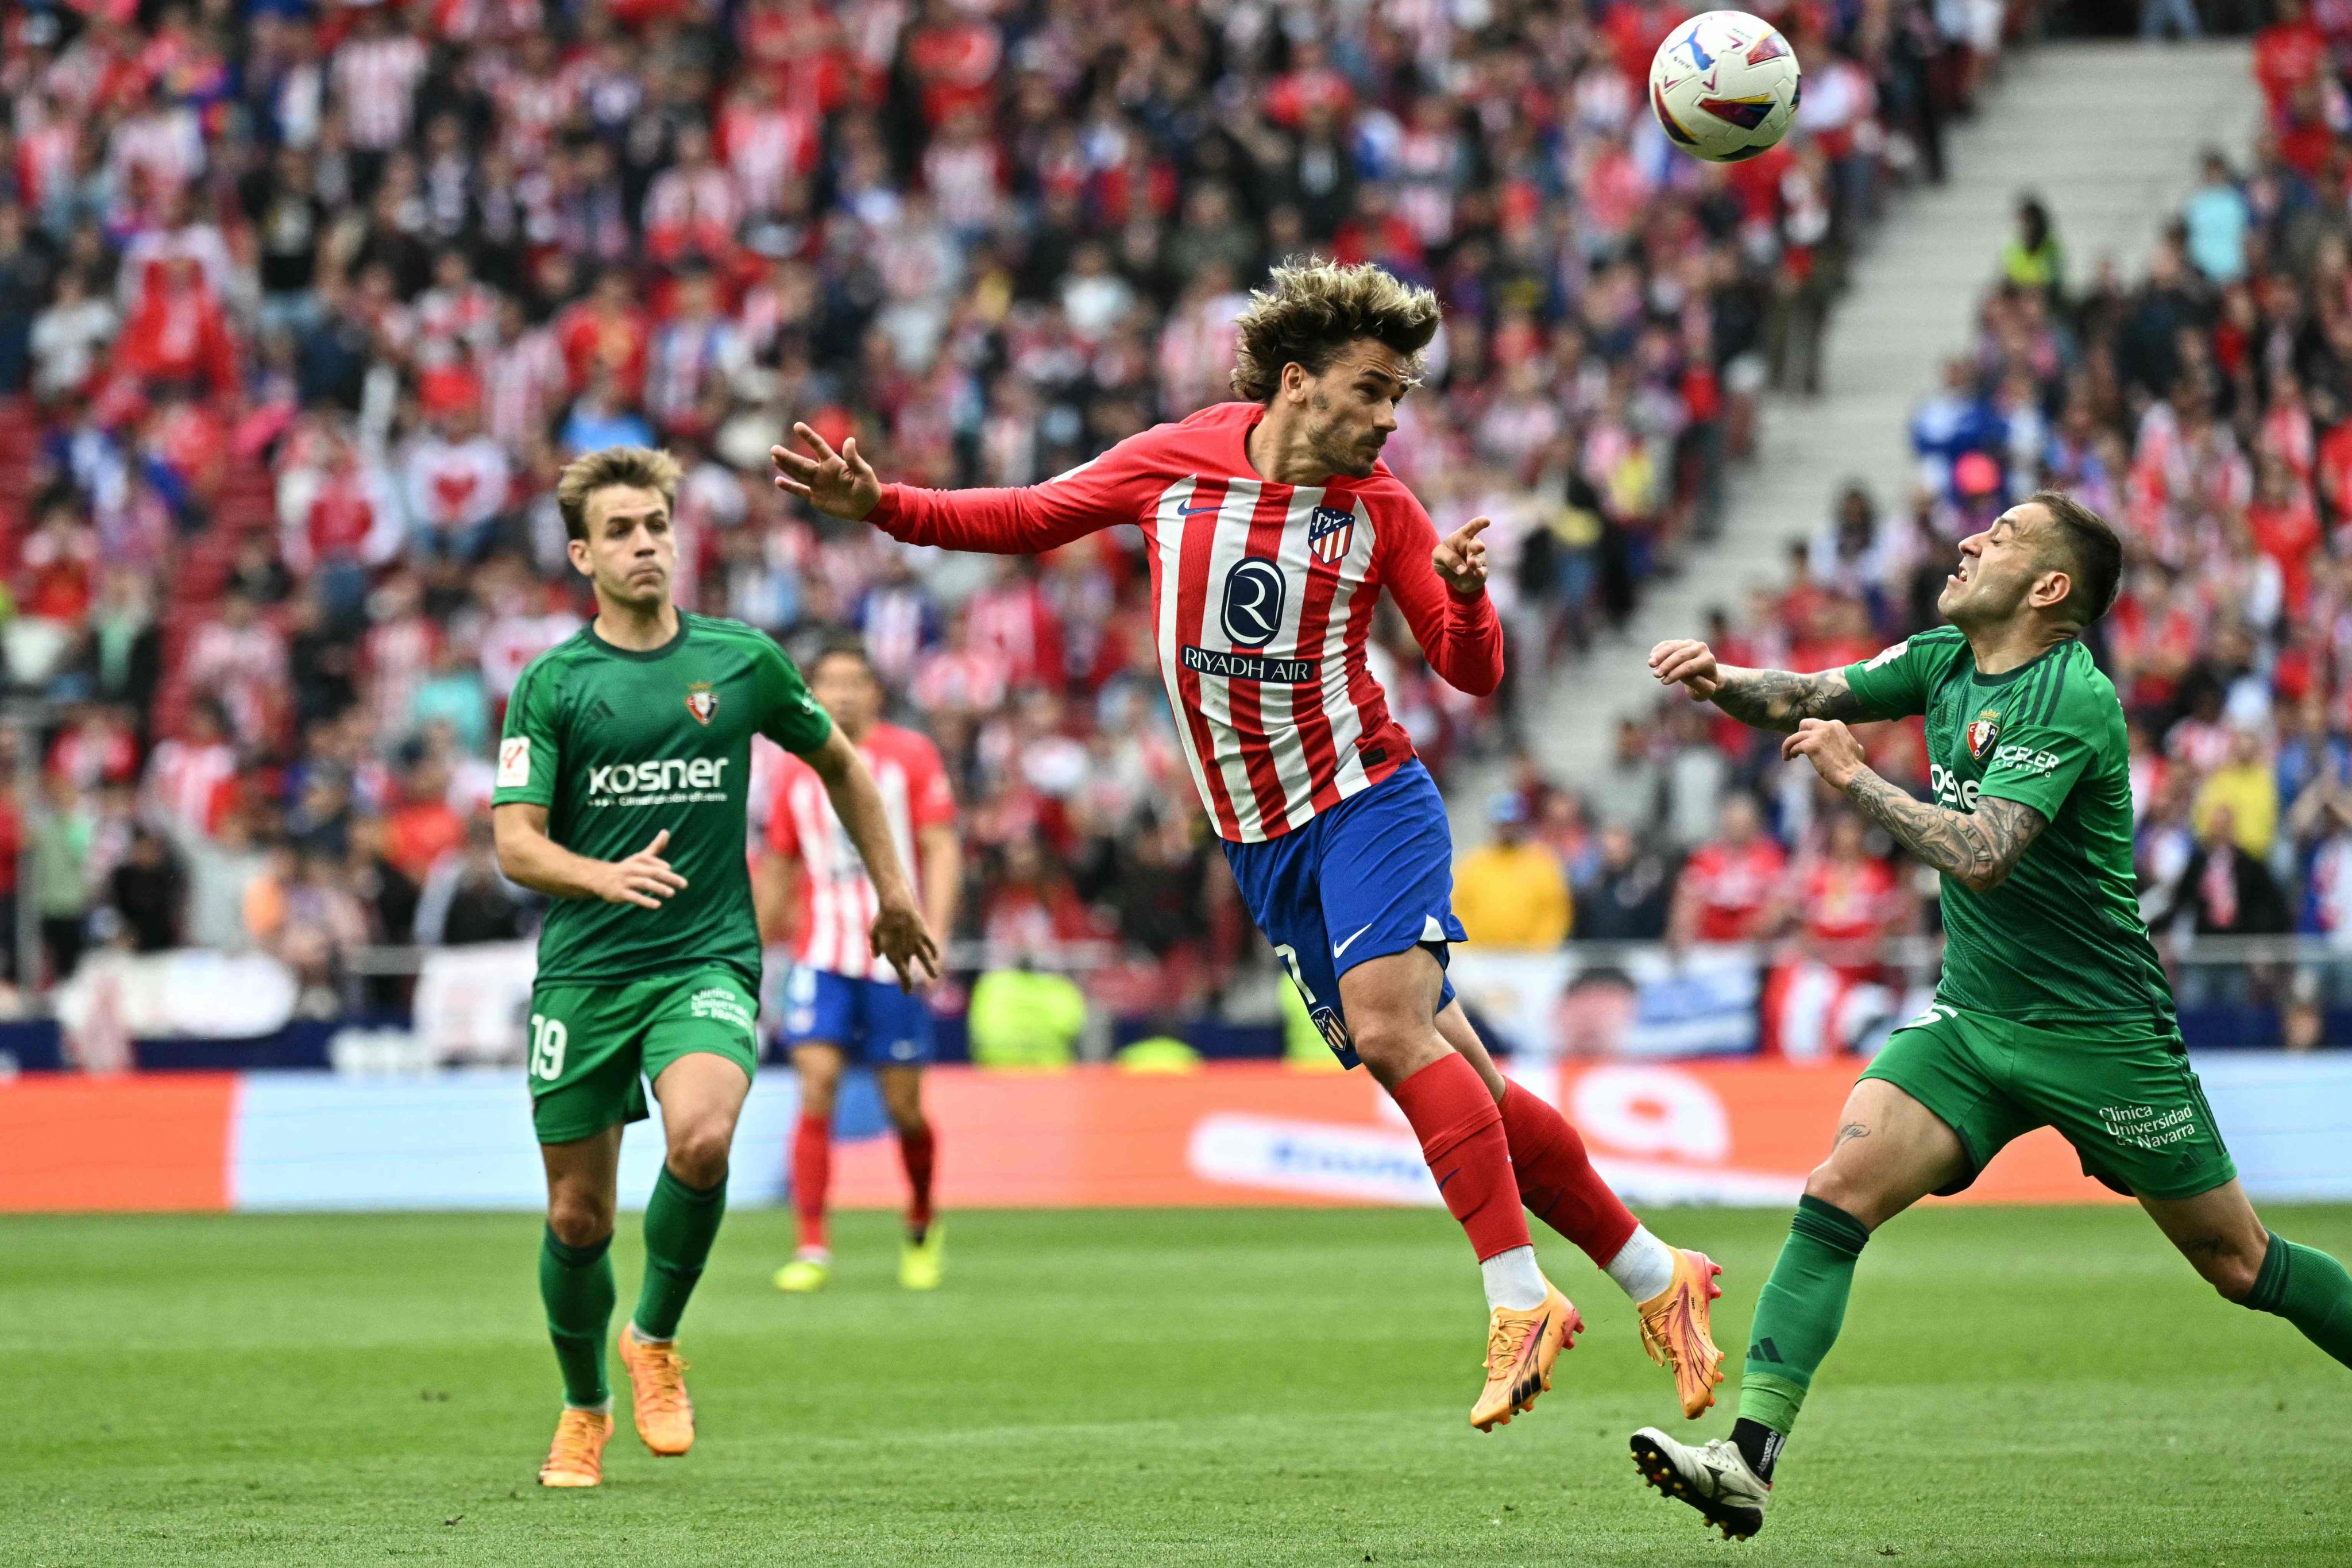 Antoine Griezmann is among the leading names at Spanish club Atletico Madrid. Photo: AFP